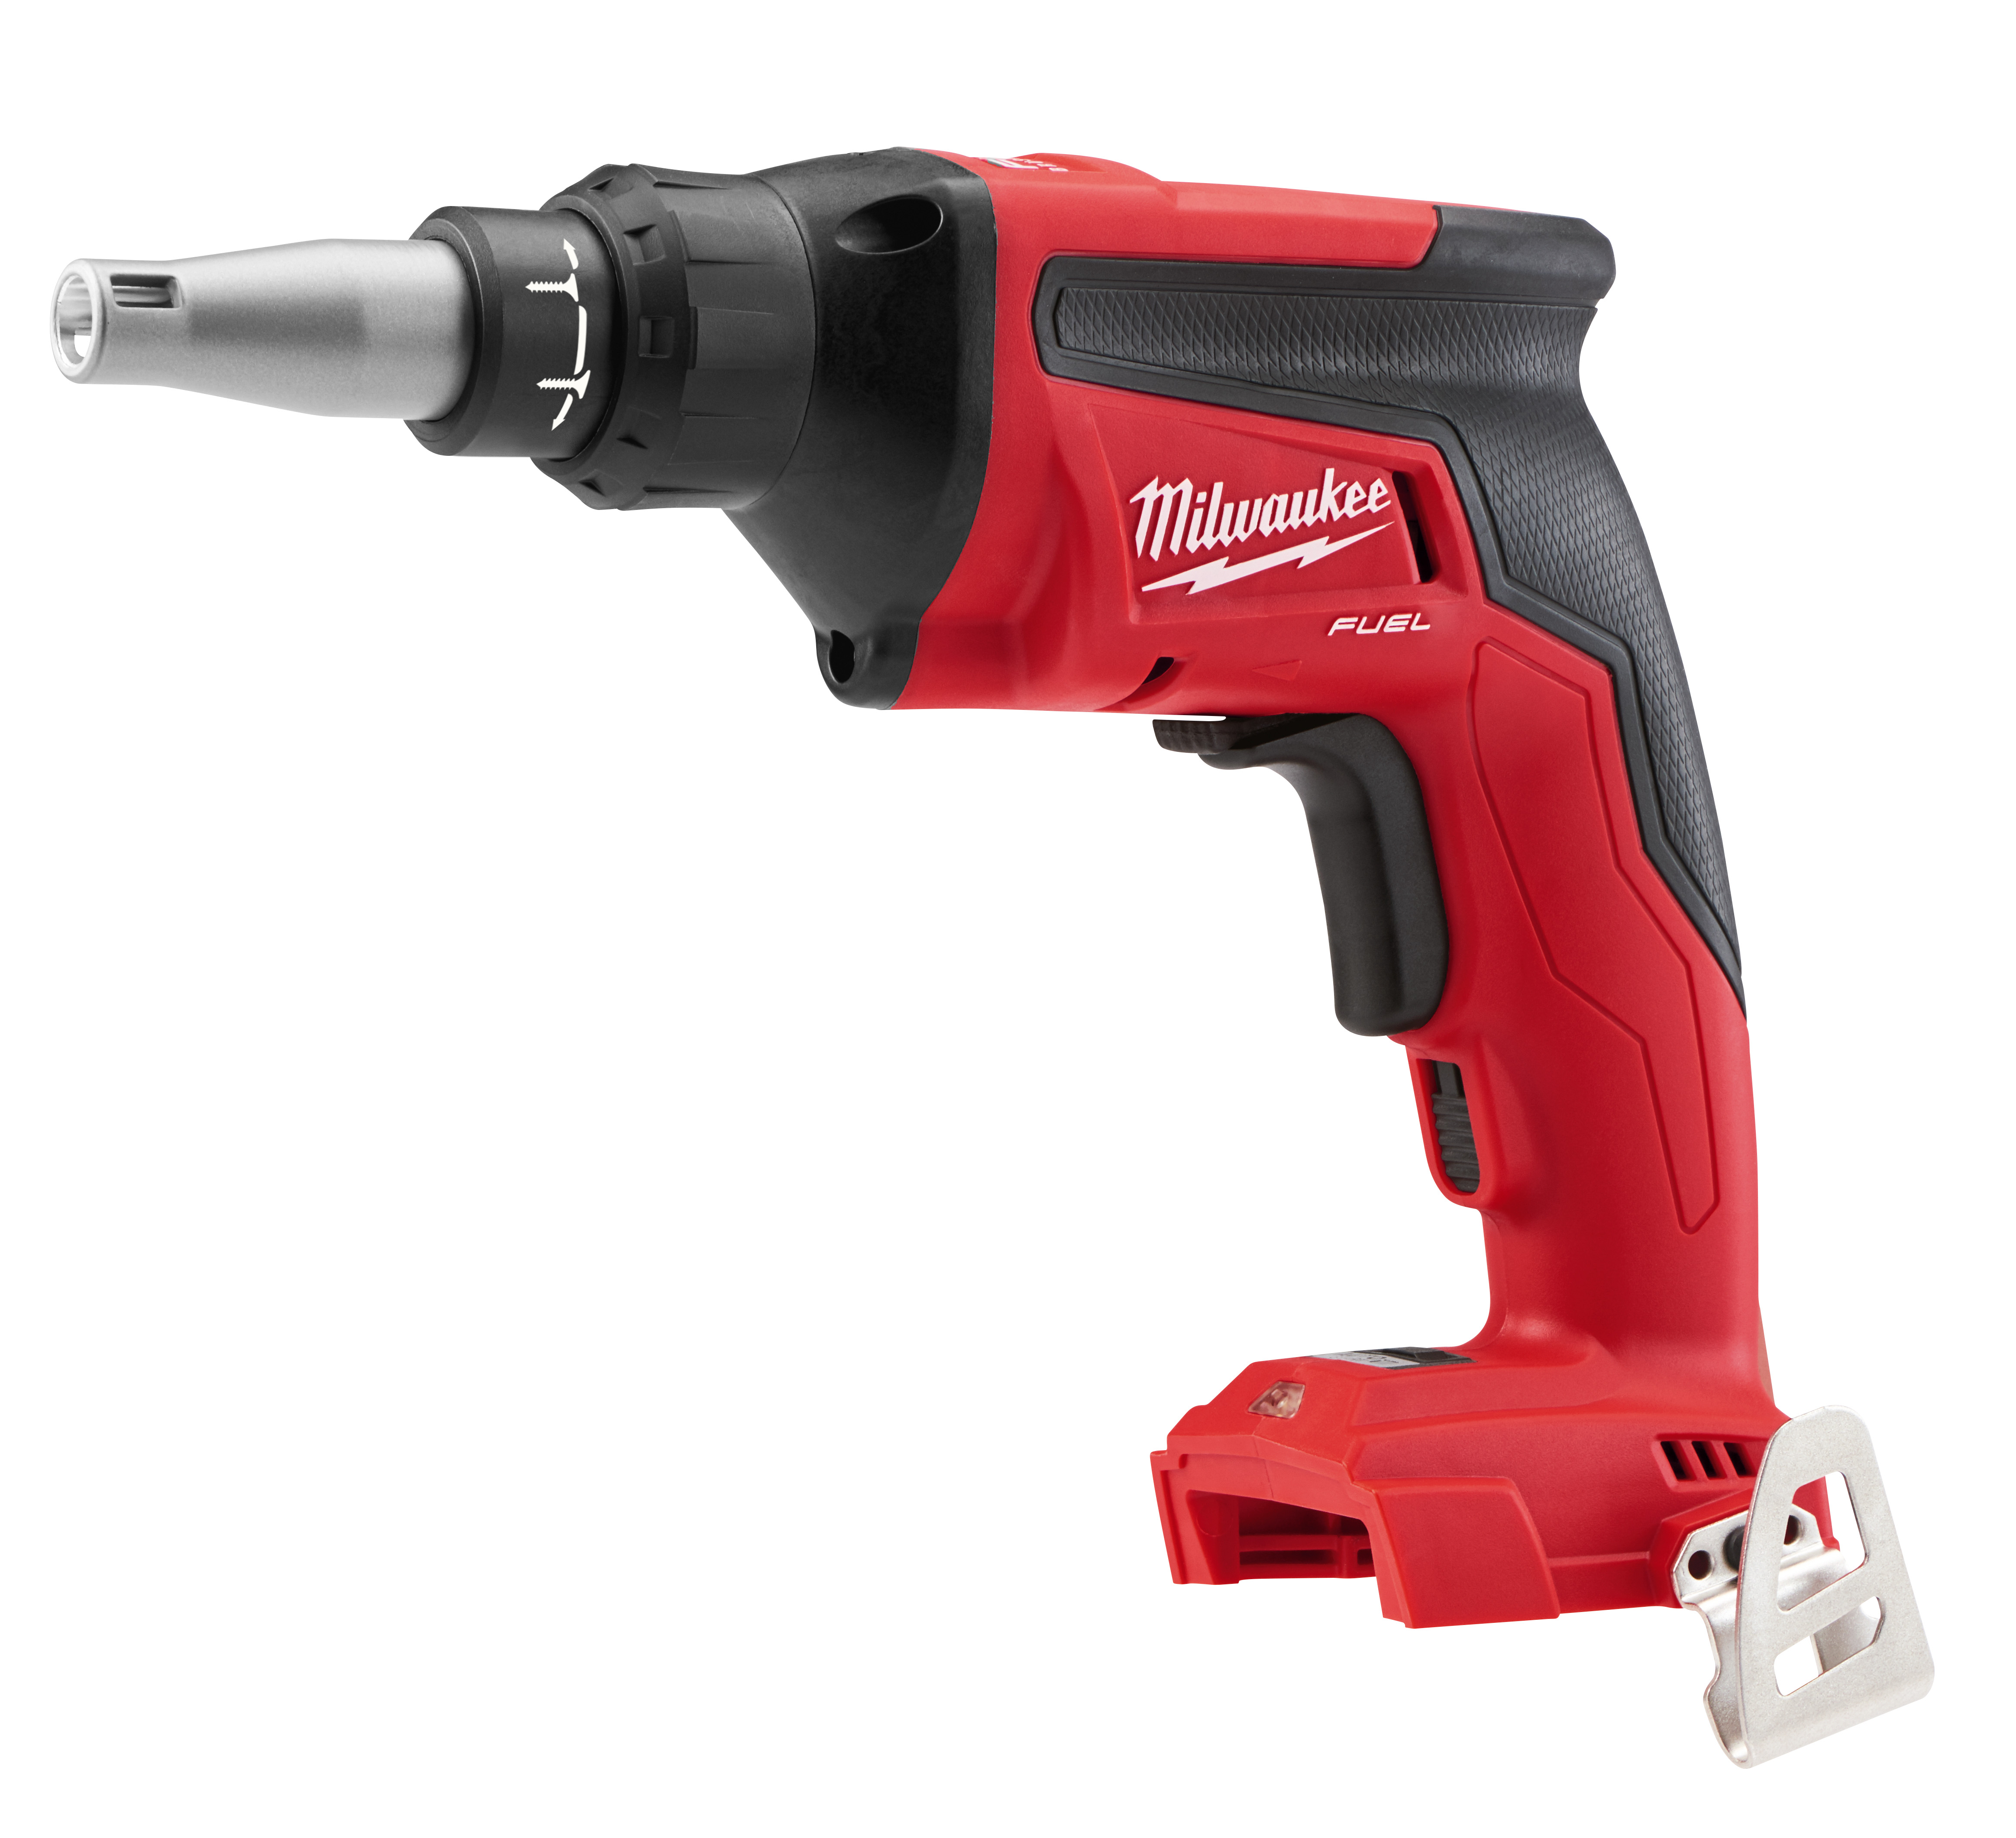 M18 FUEL 18 Volt Lithium-Ion Cordless Drywall Screw Gun - Tool Only